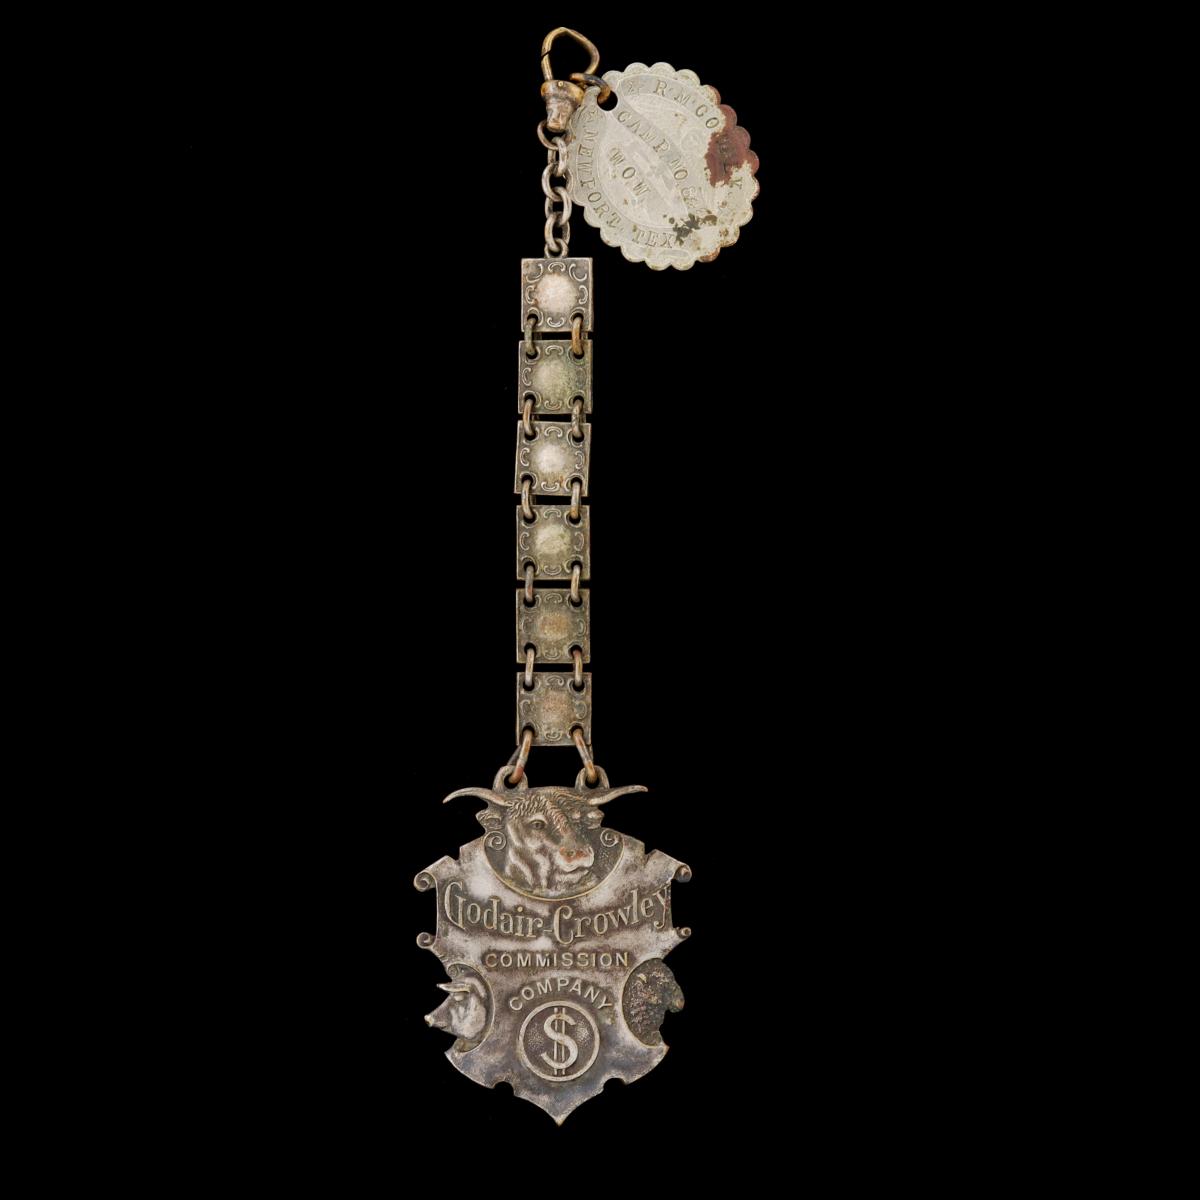 GODAIR CROWLEY COMMISSION WATCH FOB WITH STEER C. 1910